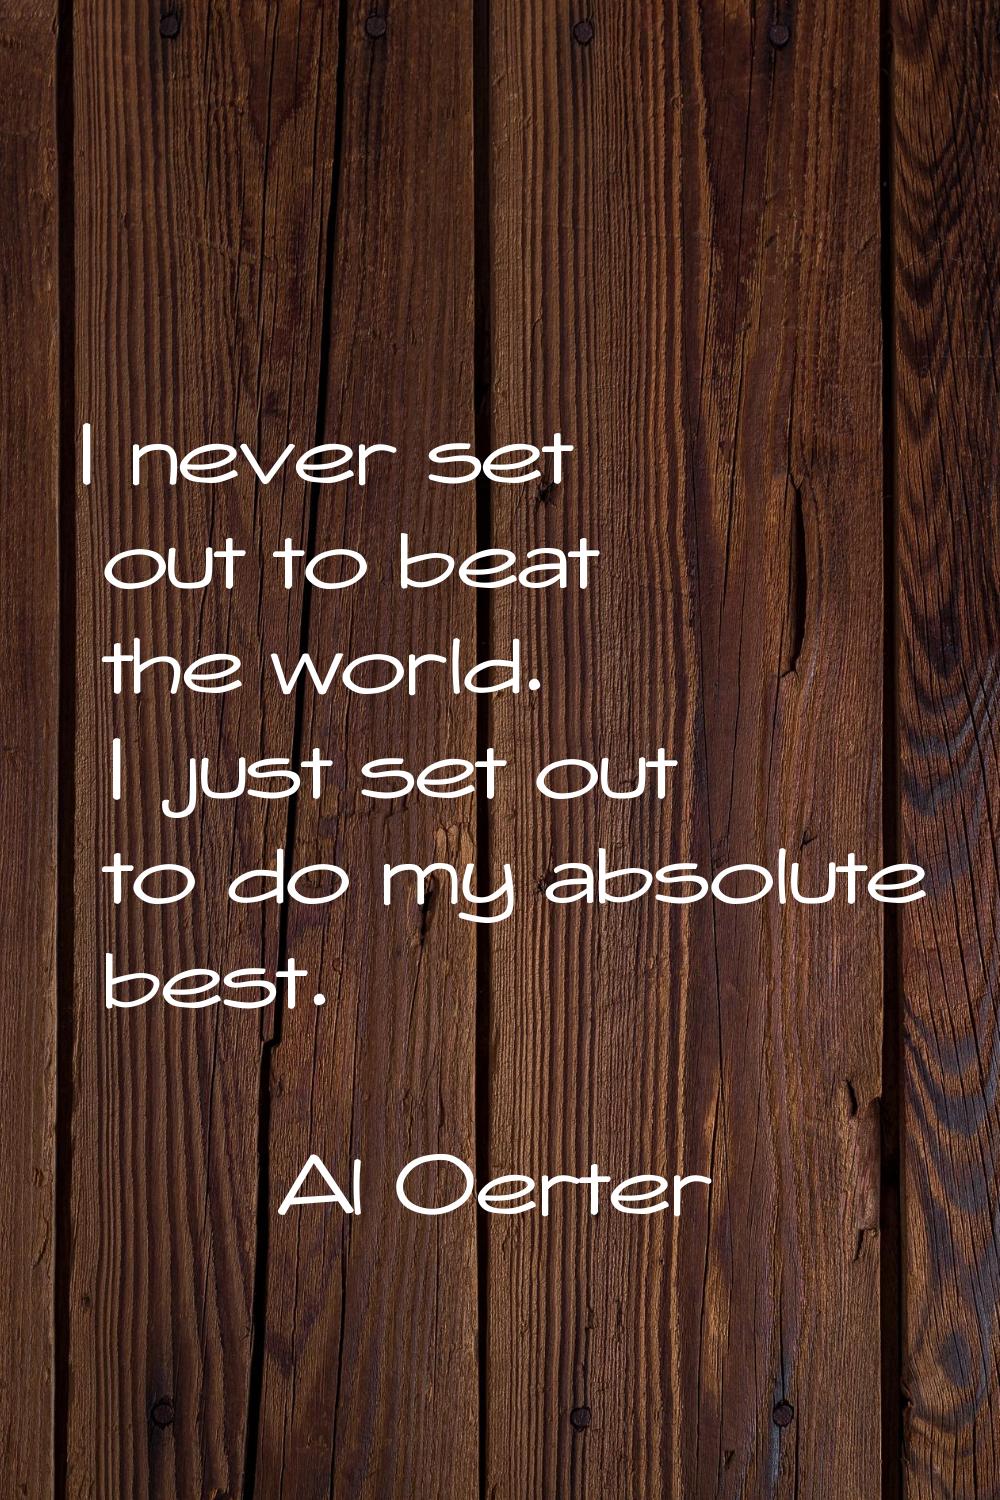 I never set out to beat the world. I just set out to do my absolute best.